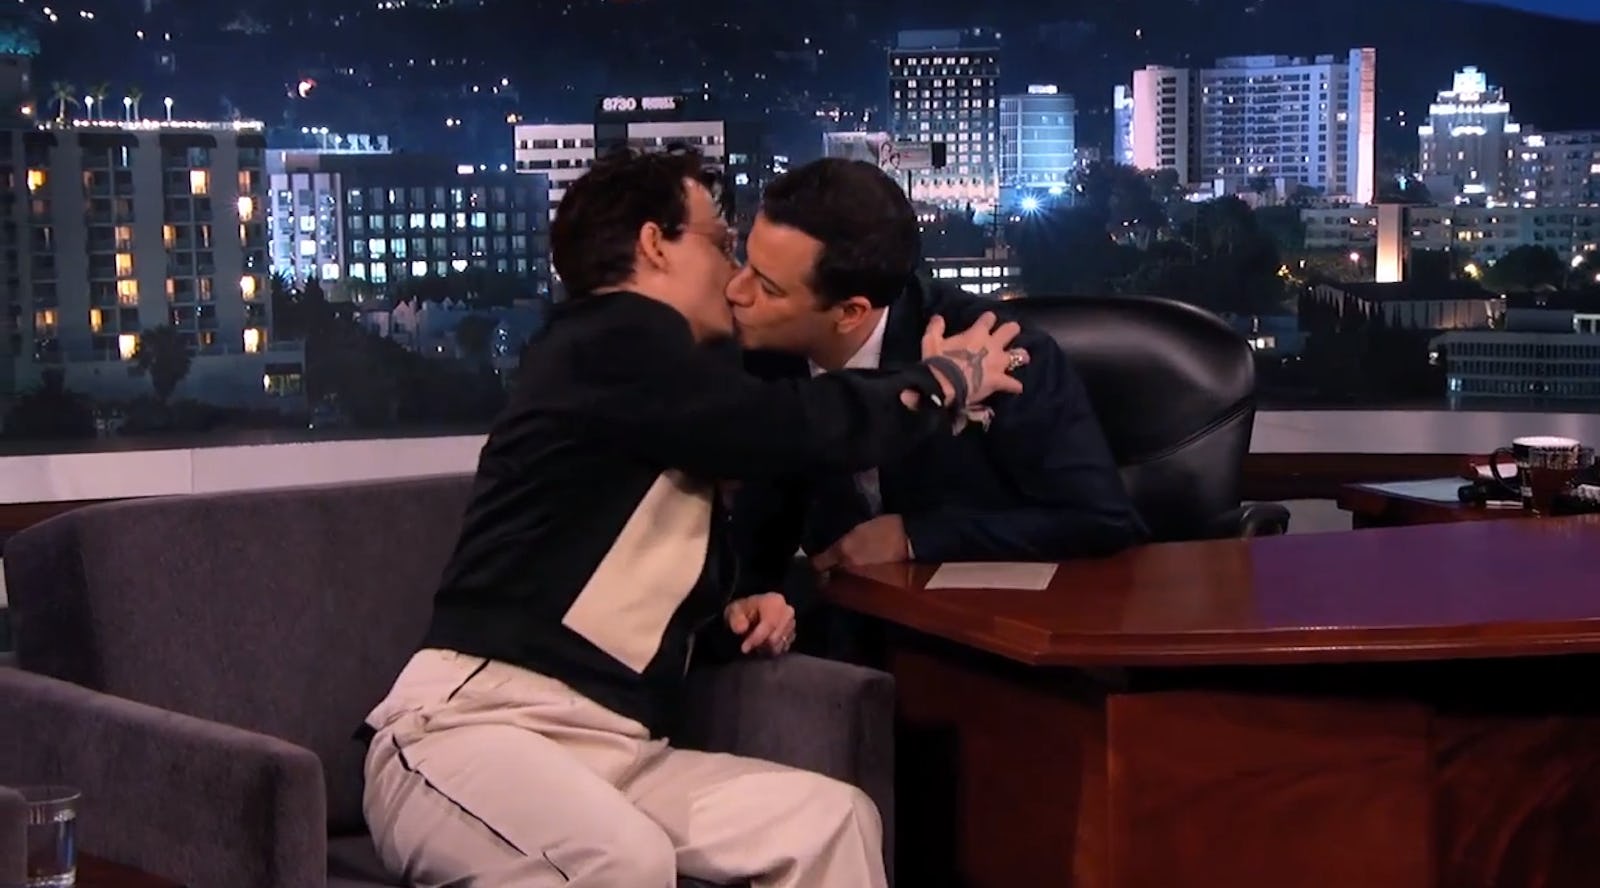 Johnny Depp Kisses Jimmy Kimmel Again While Poor Amber Heard Gets The